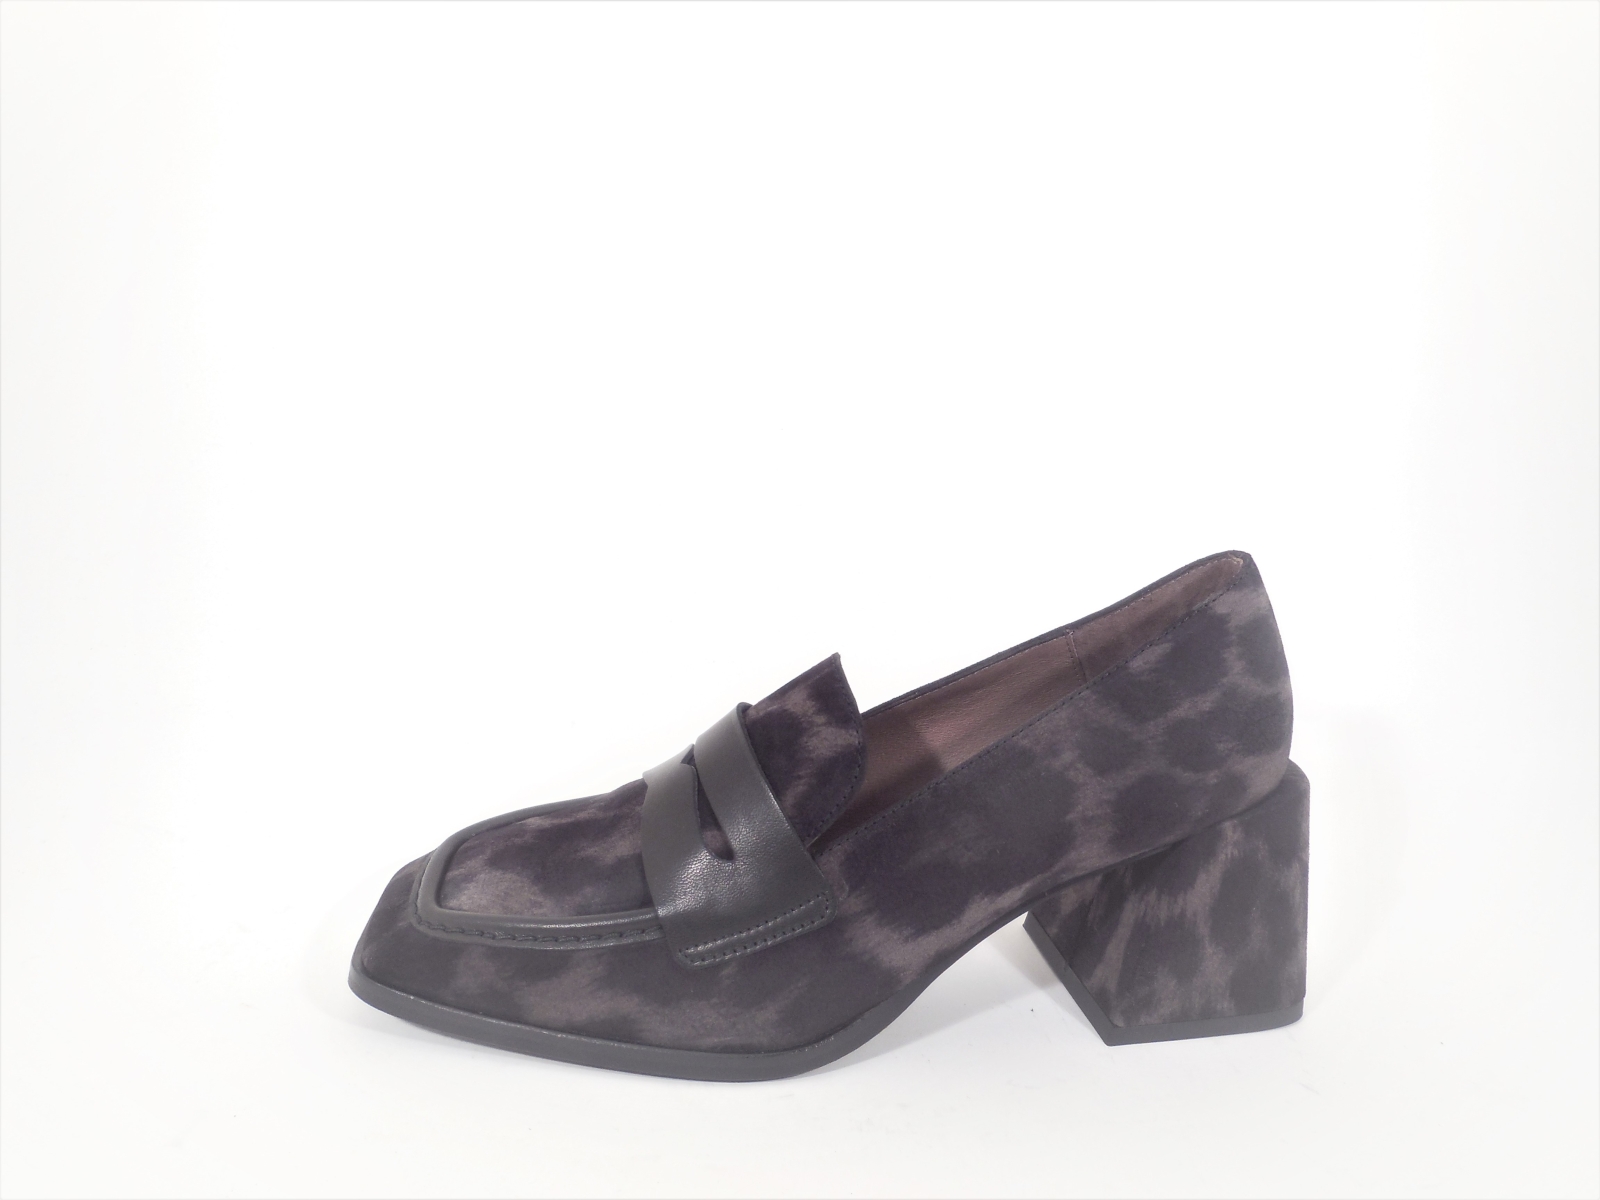 Moccassin print leopard